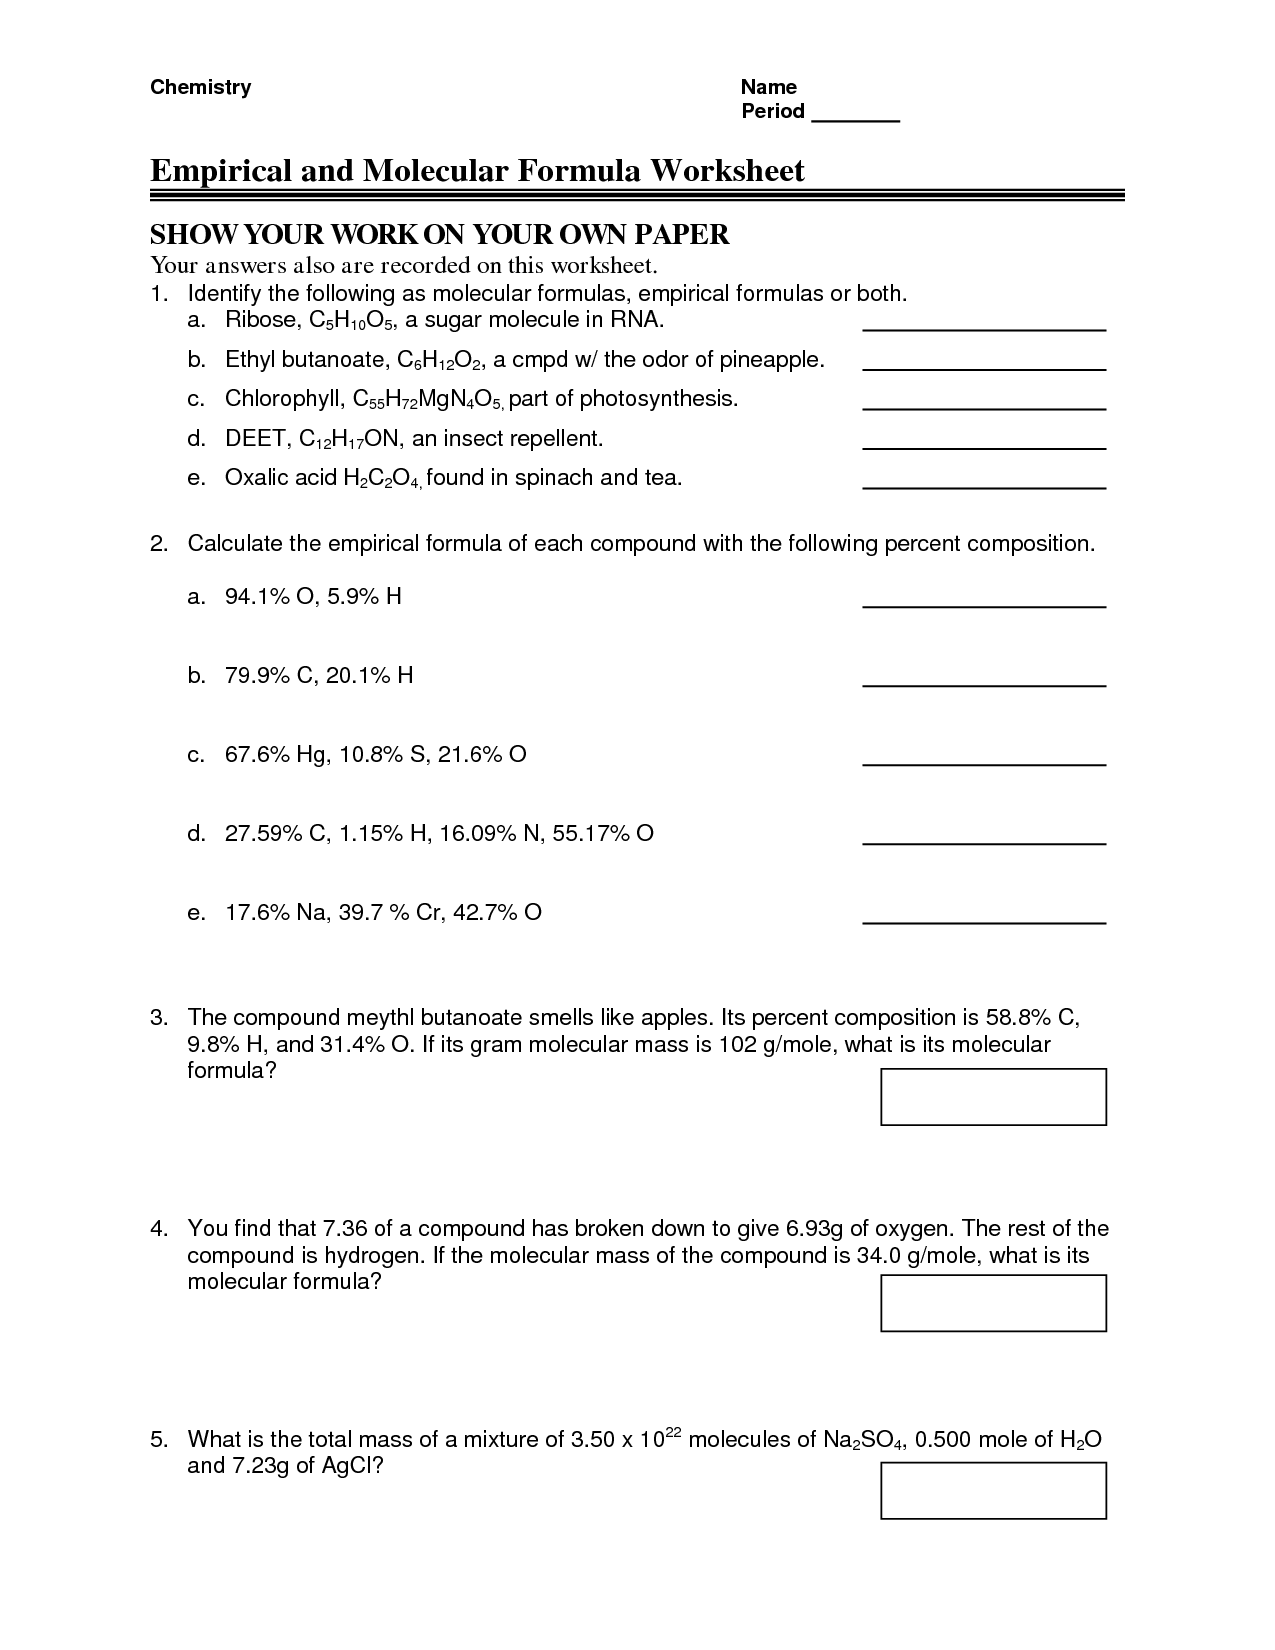 Empirical And Molecular Formula Worksheet Answers With Work